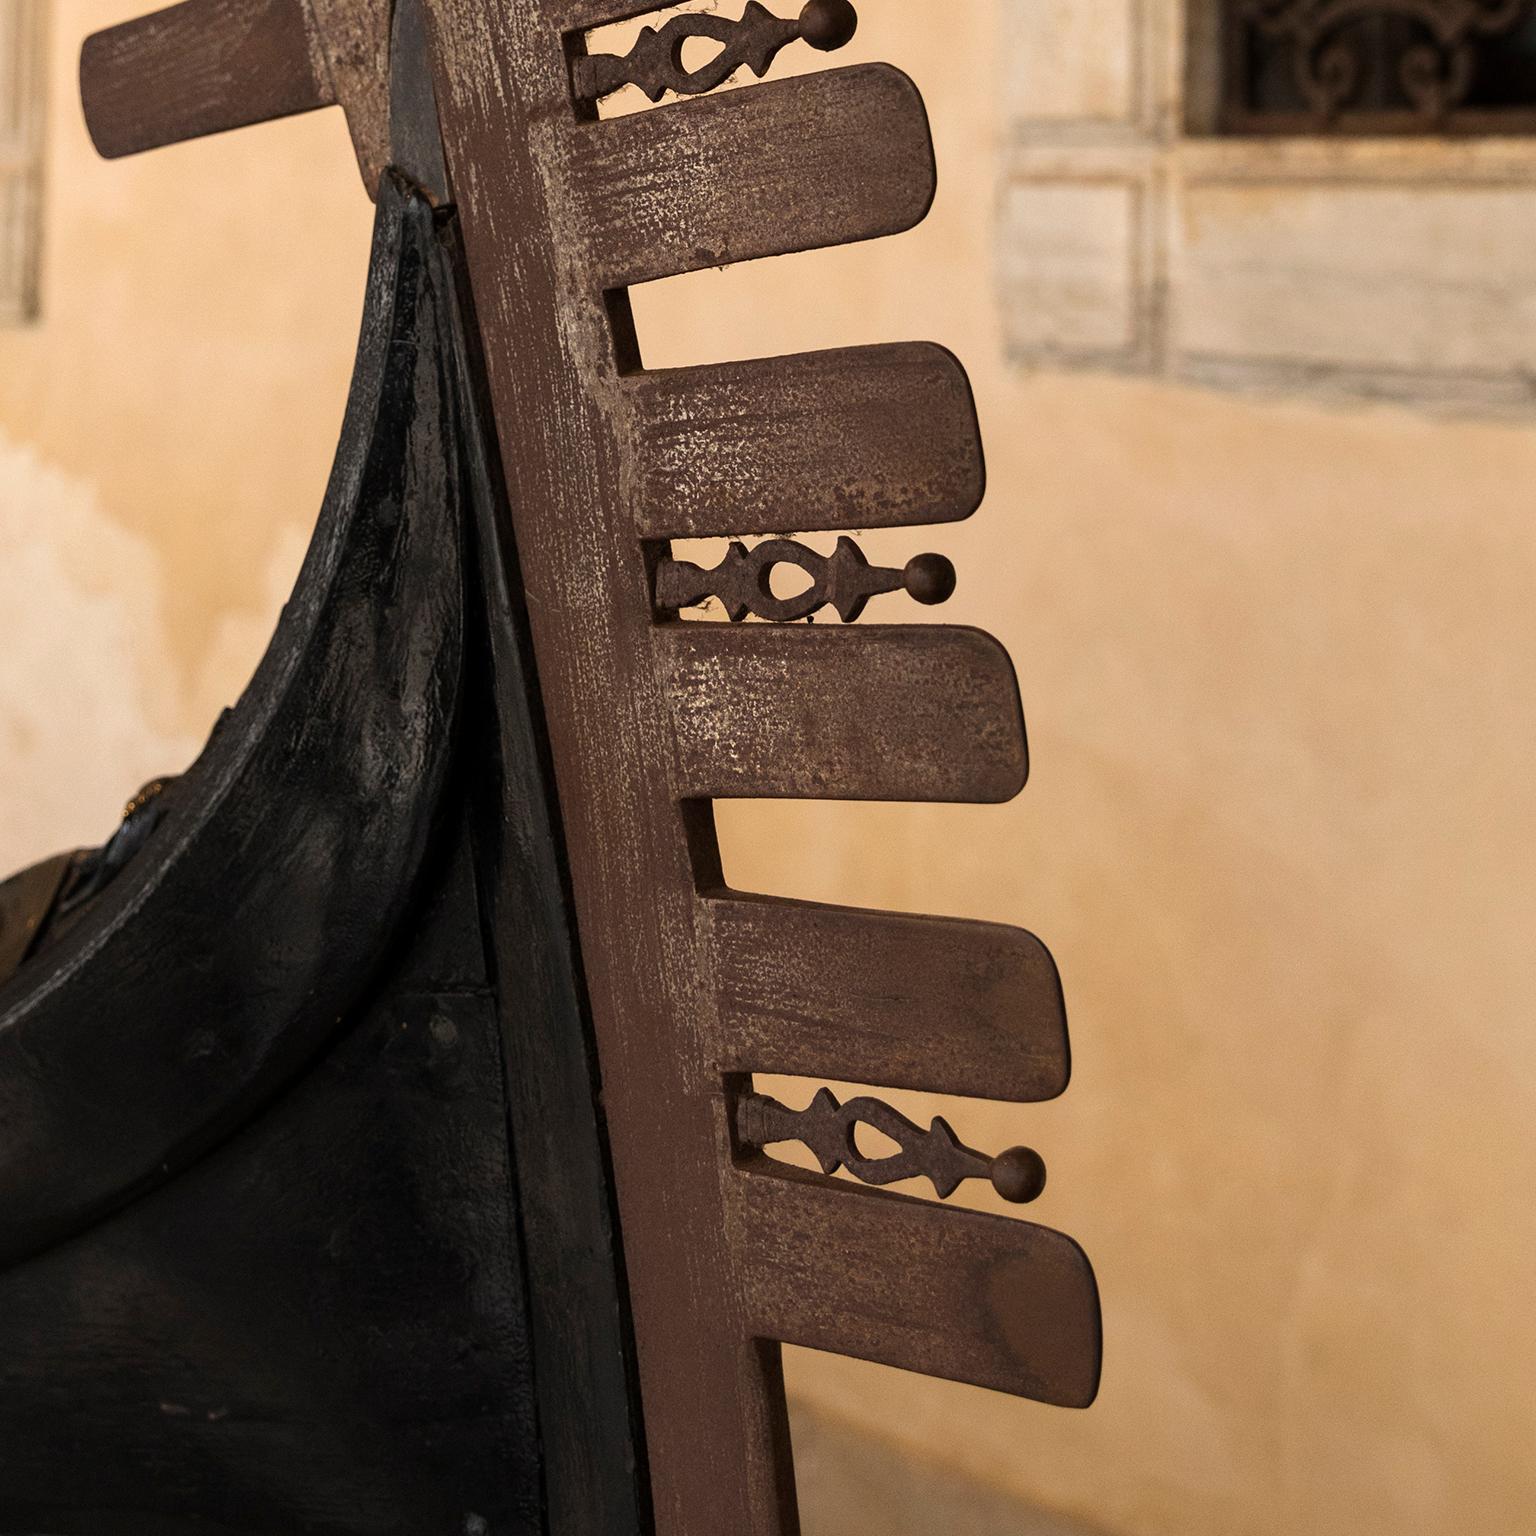 Gondola, “Capello del Doge”, Doges Palace, Venice, Italy 2018
Photograph by Cosmo Condina. Bow of an antique gondola.
Archival pigment print 19 X 12.6 in.  Edition of 10. This is # 3/10 in the edition.

Close up detail of an antique gondola at the